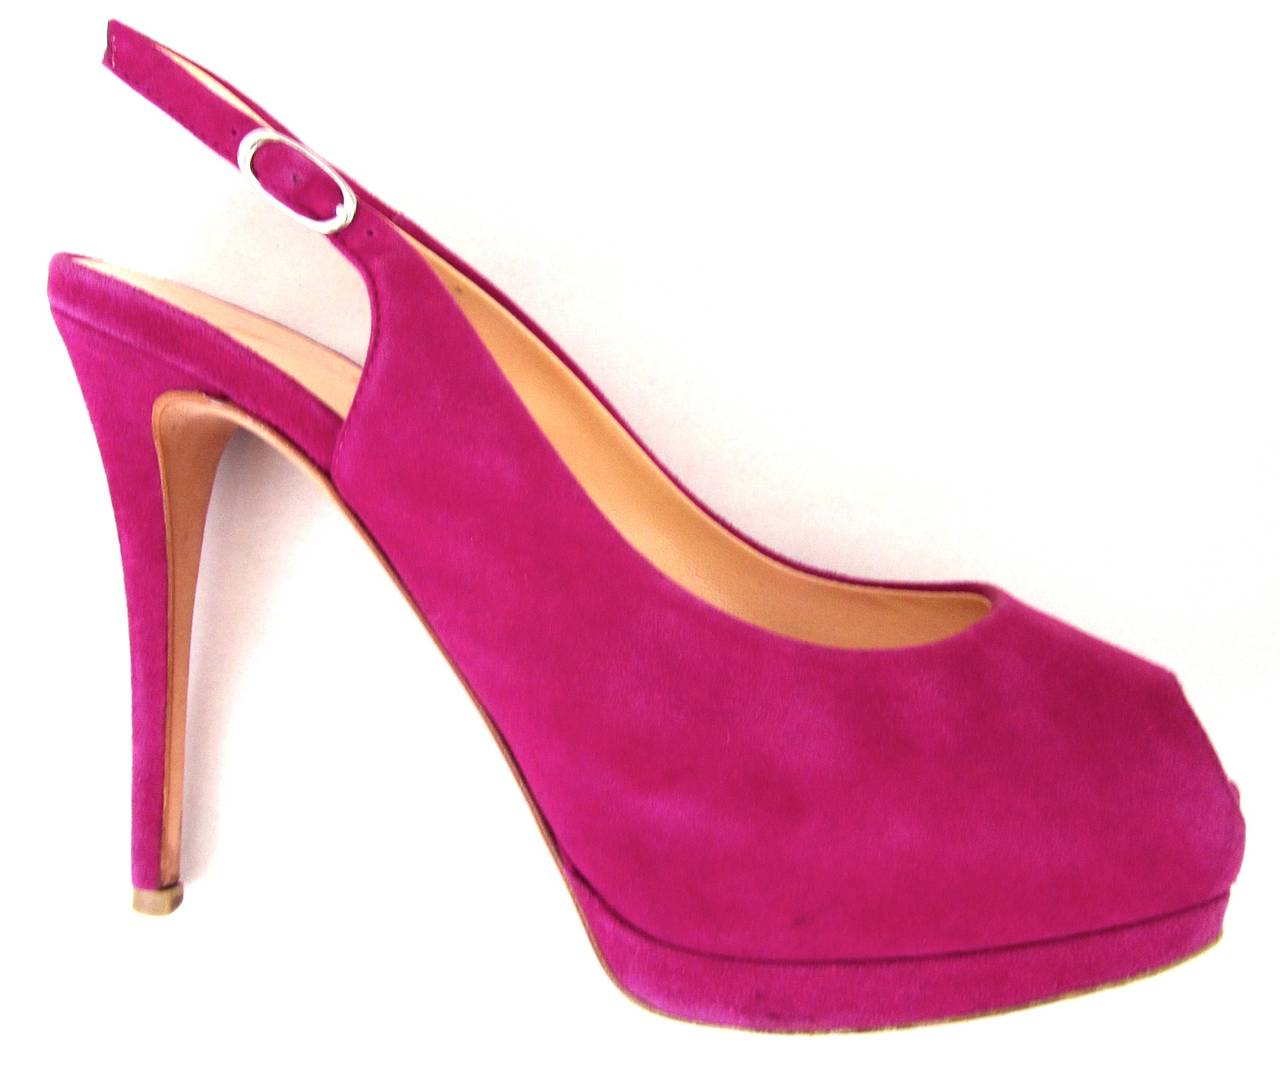 Red Giuseppe Zanotti Pink Fuchsia Suede Pumps with Heel Strap - Size 37 For Sale